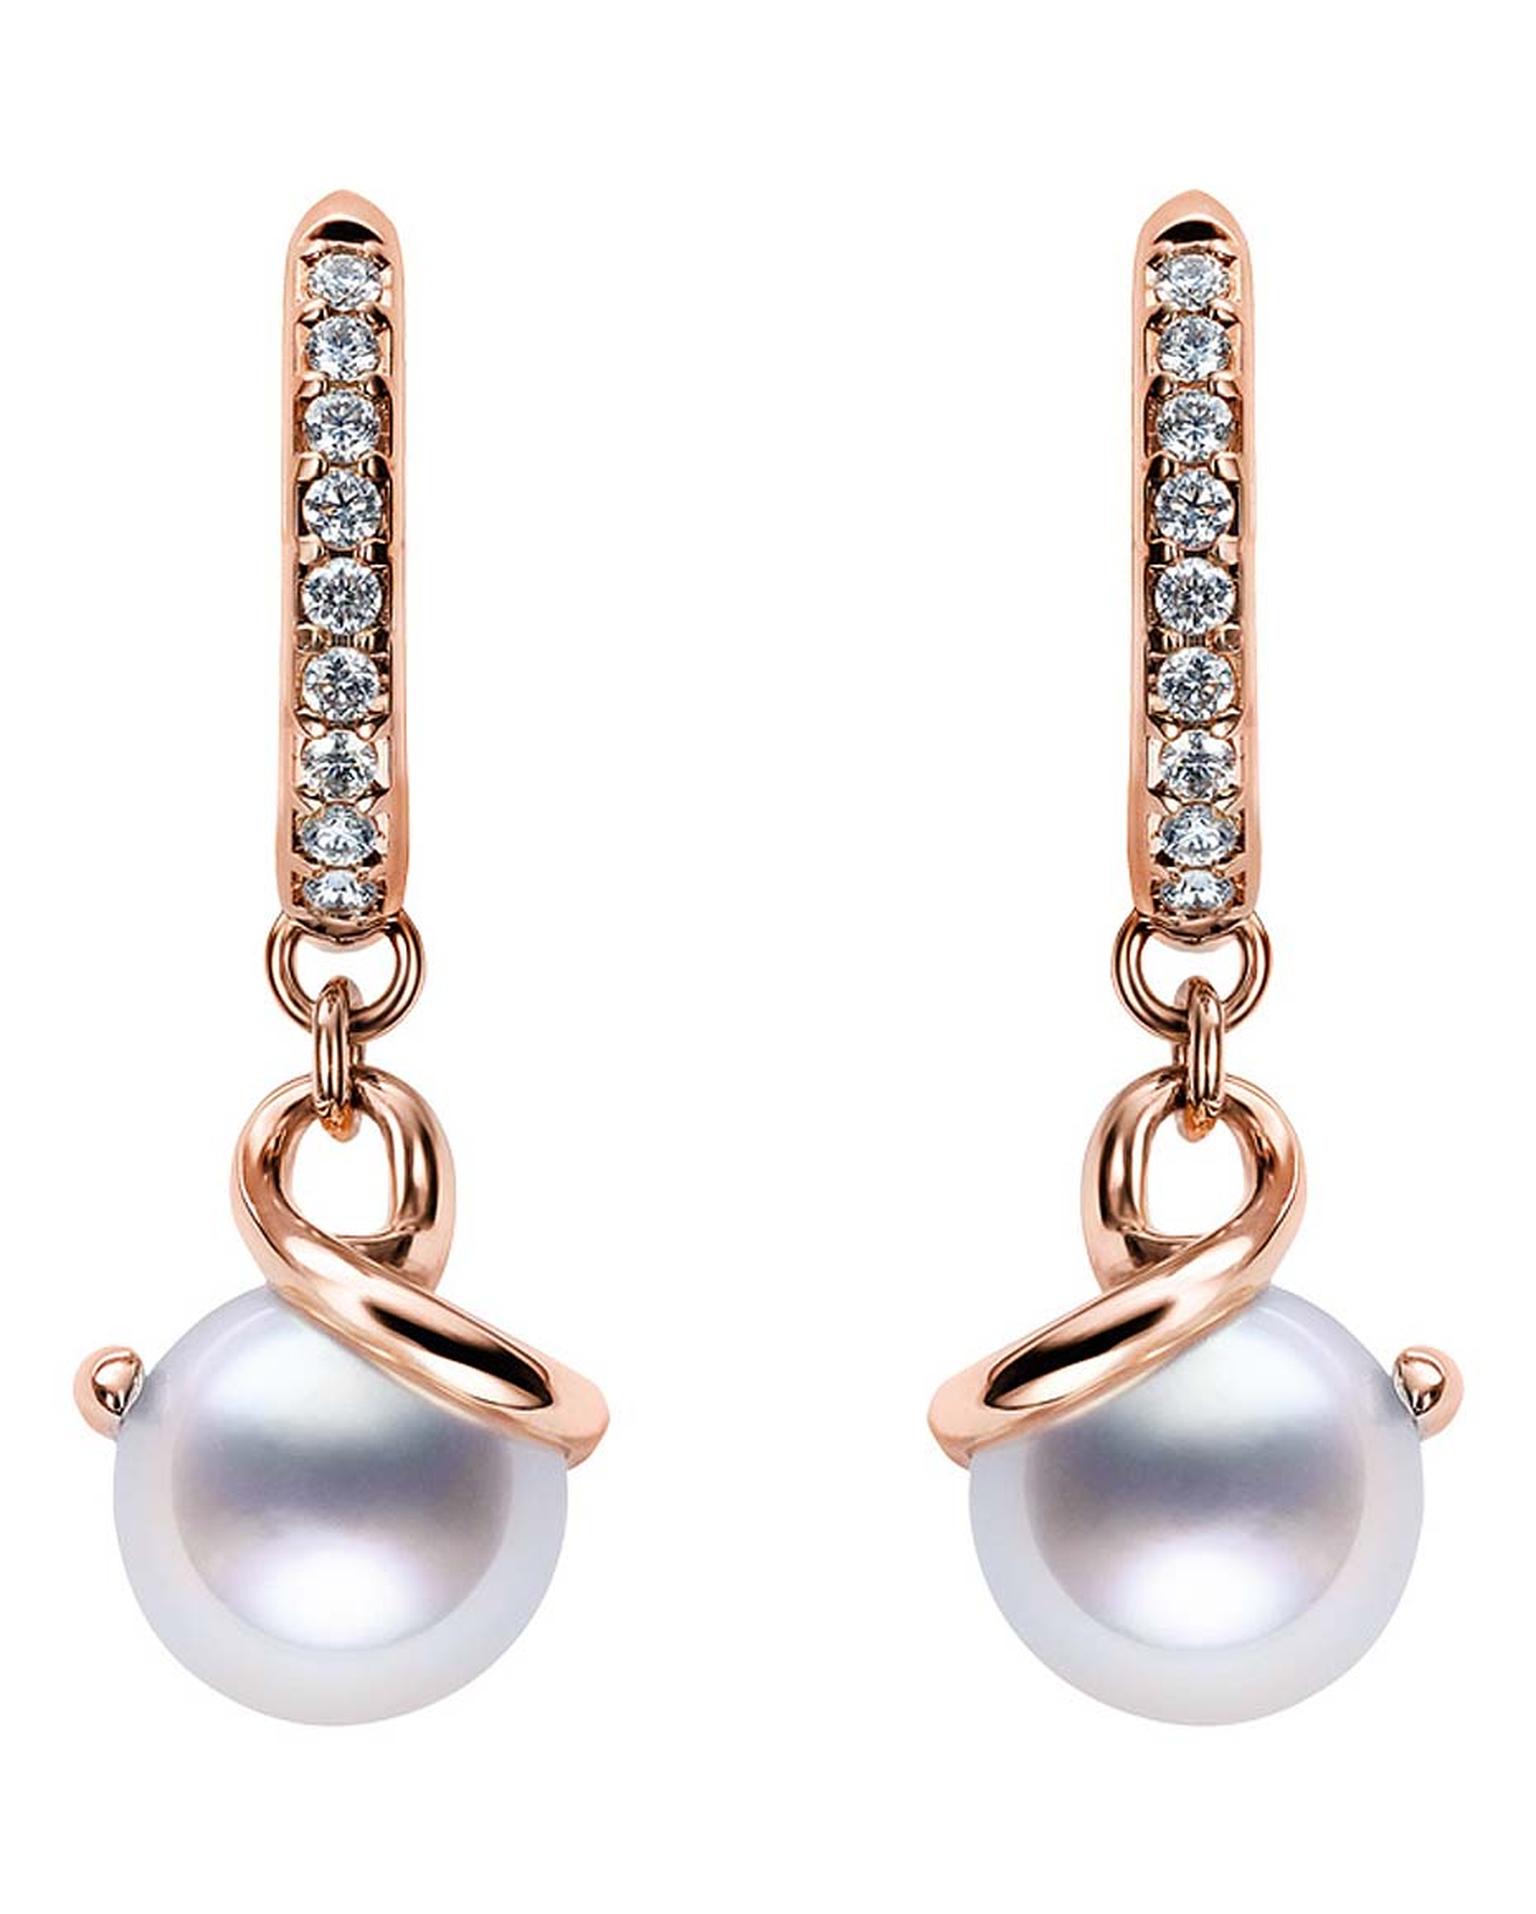 Mikimoto South Sea Pearl earrings in rose gold from the Twist collection featuring a white South Sea cultured pearl and a twist of diamonds. £1,800.